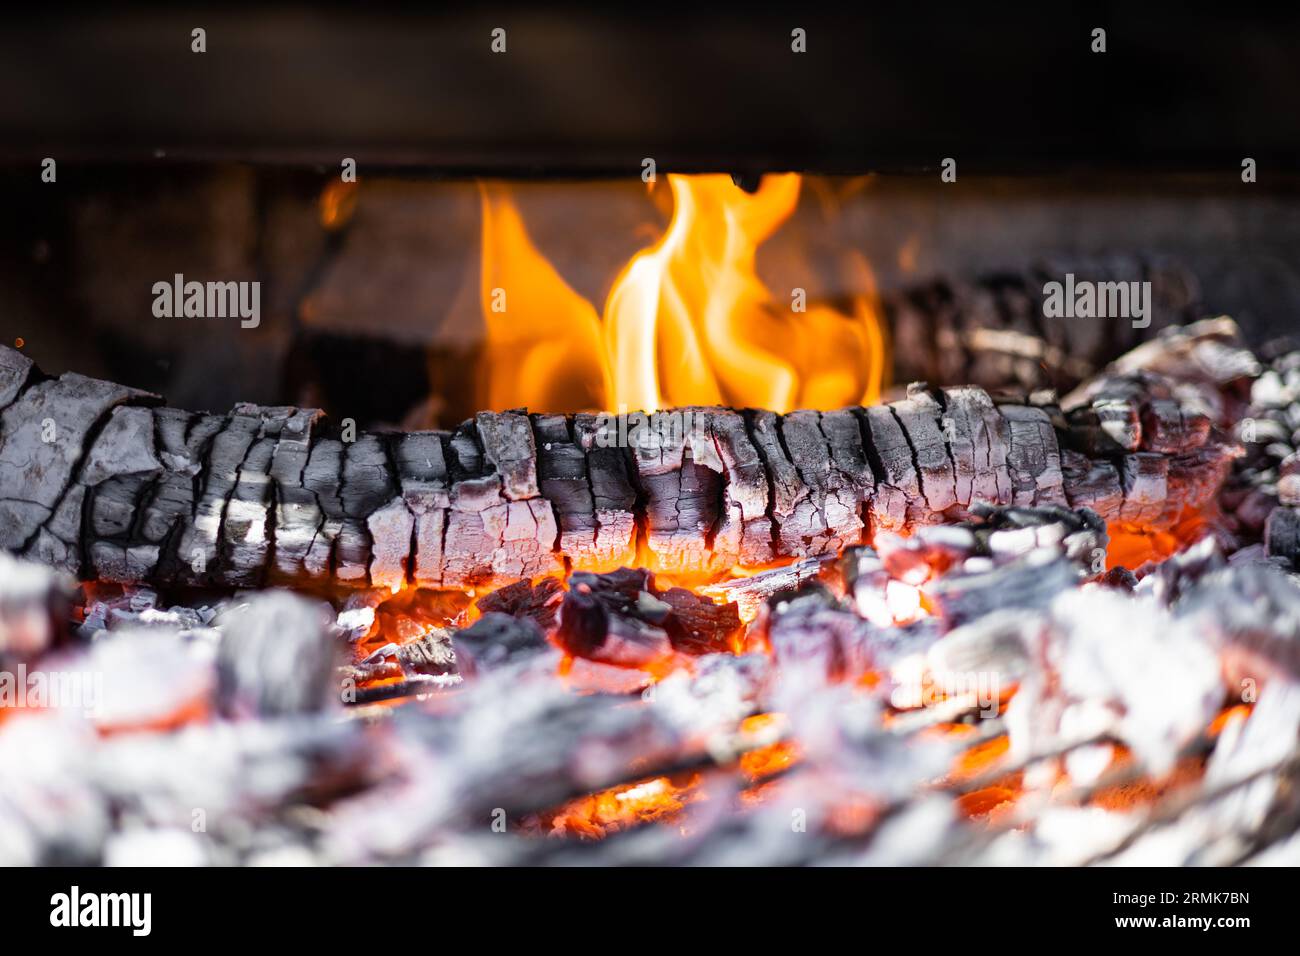 Barbecue grill pit with hot coals. Glowing and flaming charcoal briquettes for fire BBQ. Stock Photo